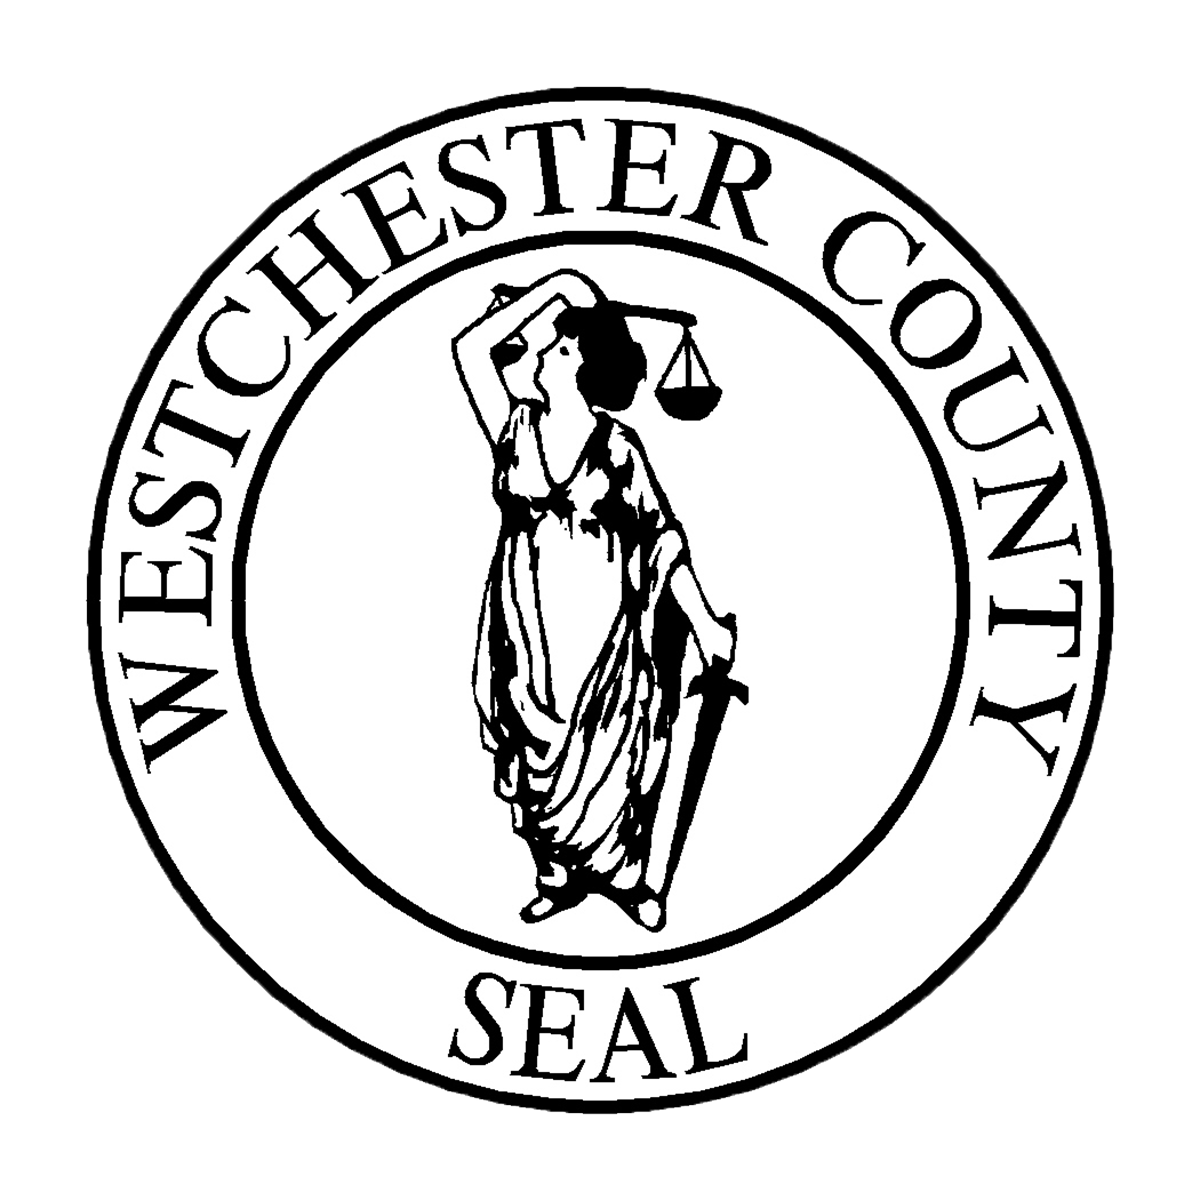 Westchester County seal